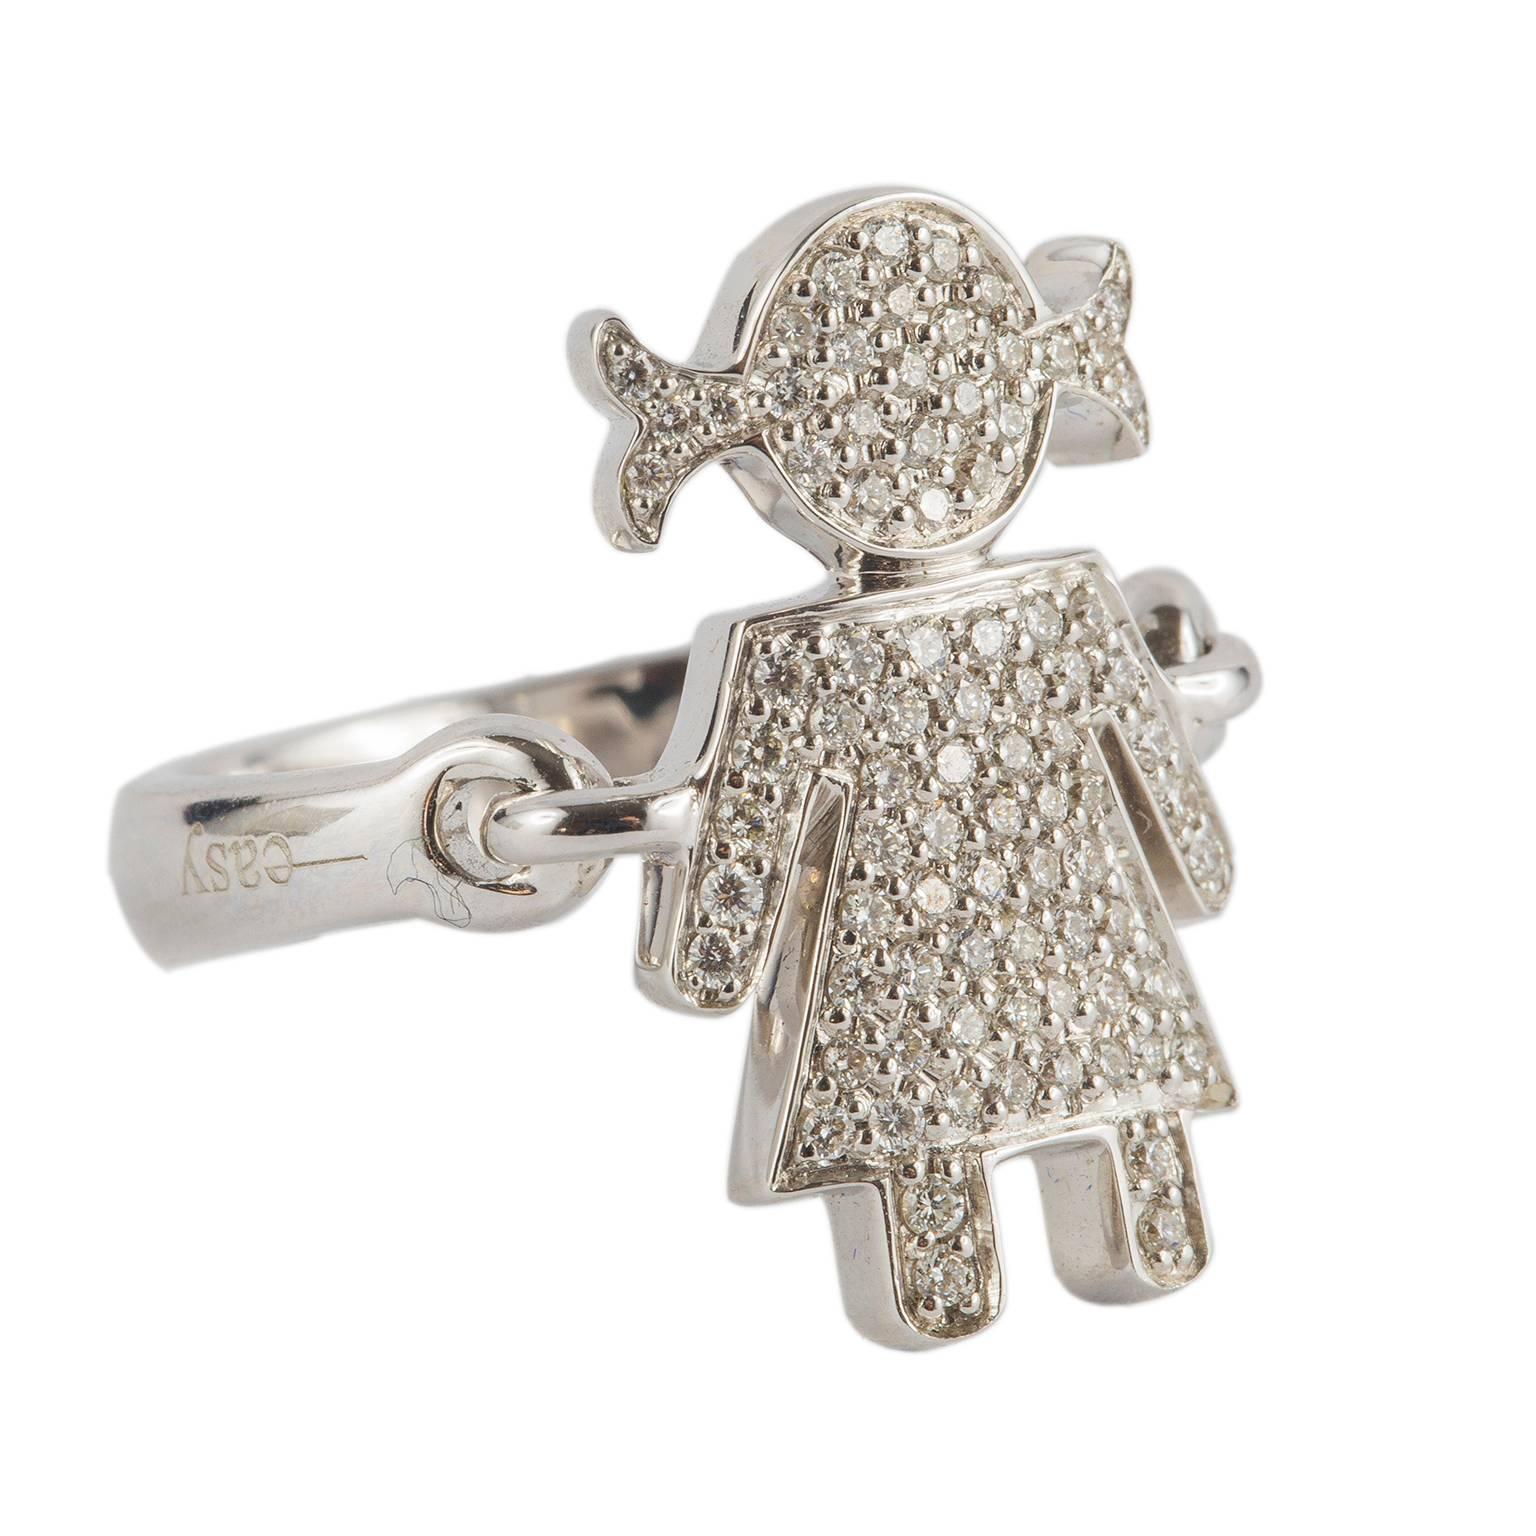 A perfect symbol of love with this 18 Karat white gold ring depicting a little girl with 0,45 ct brilliant cut diamonds.